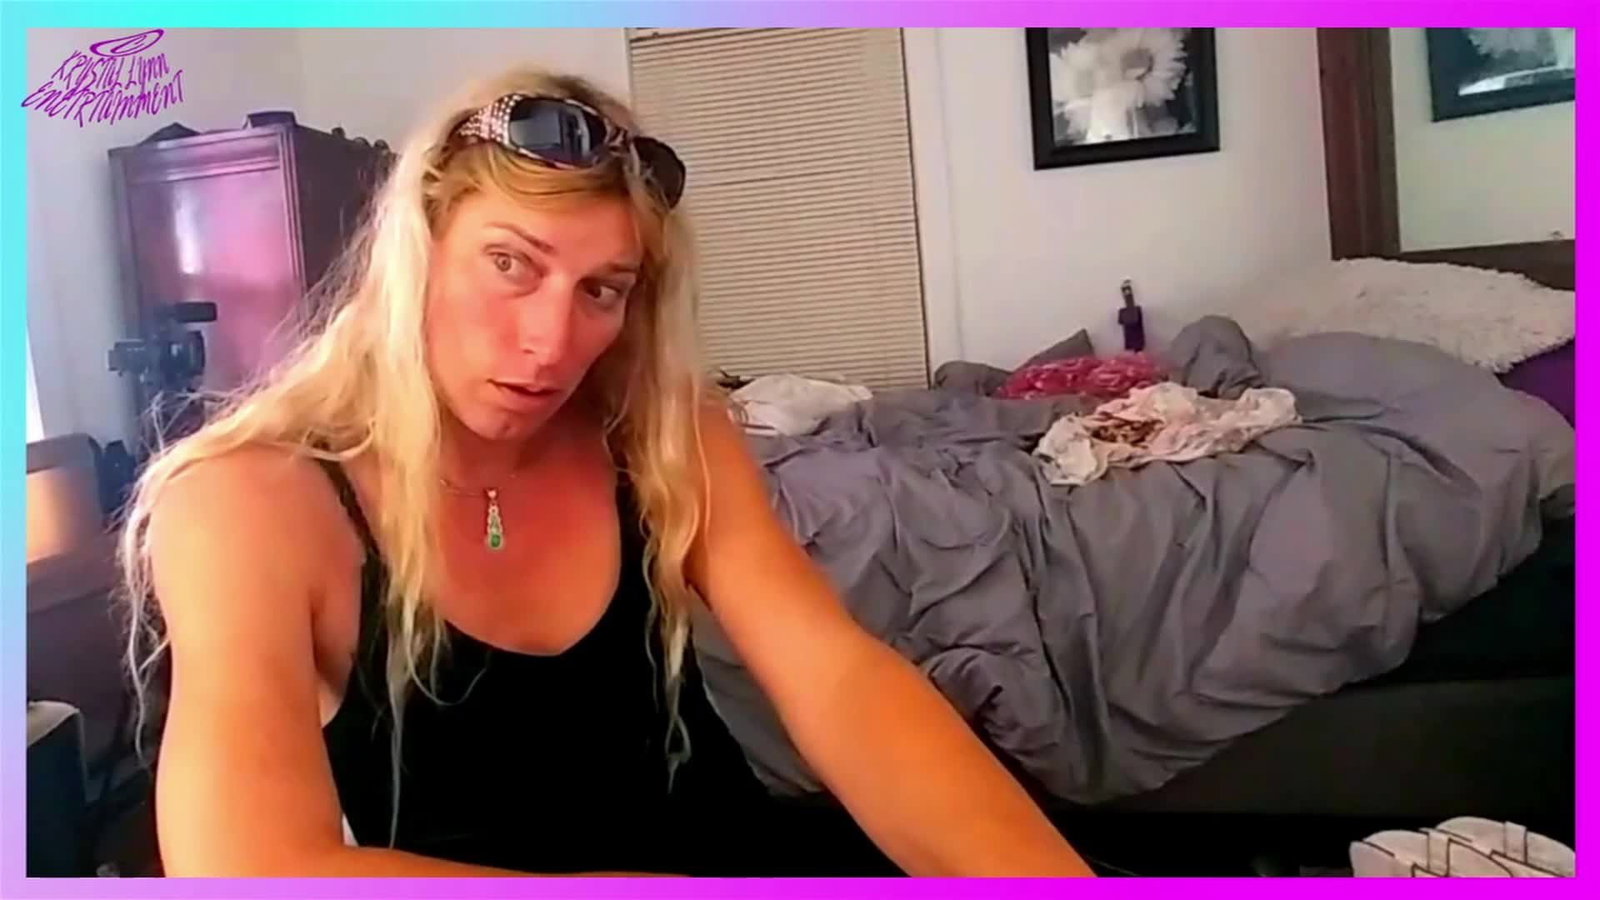 Video by Trans Girl with the username @KrystalLynn, who is a star user,  October 1, 2021 at 1:01 PM. The post is about the topic Trans and the text says 'I might be to sexy for you'